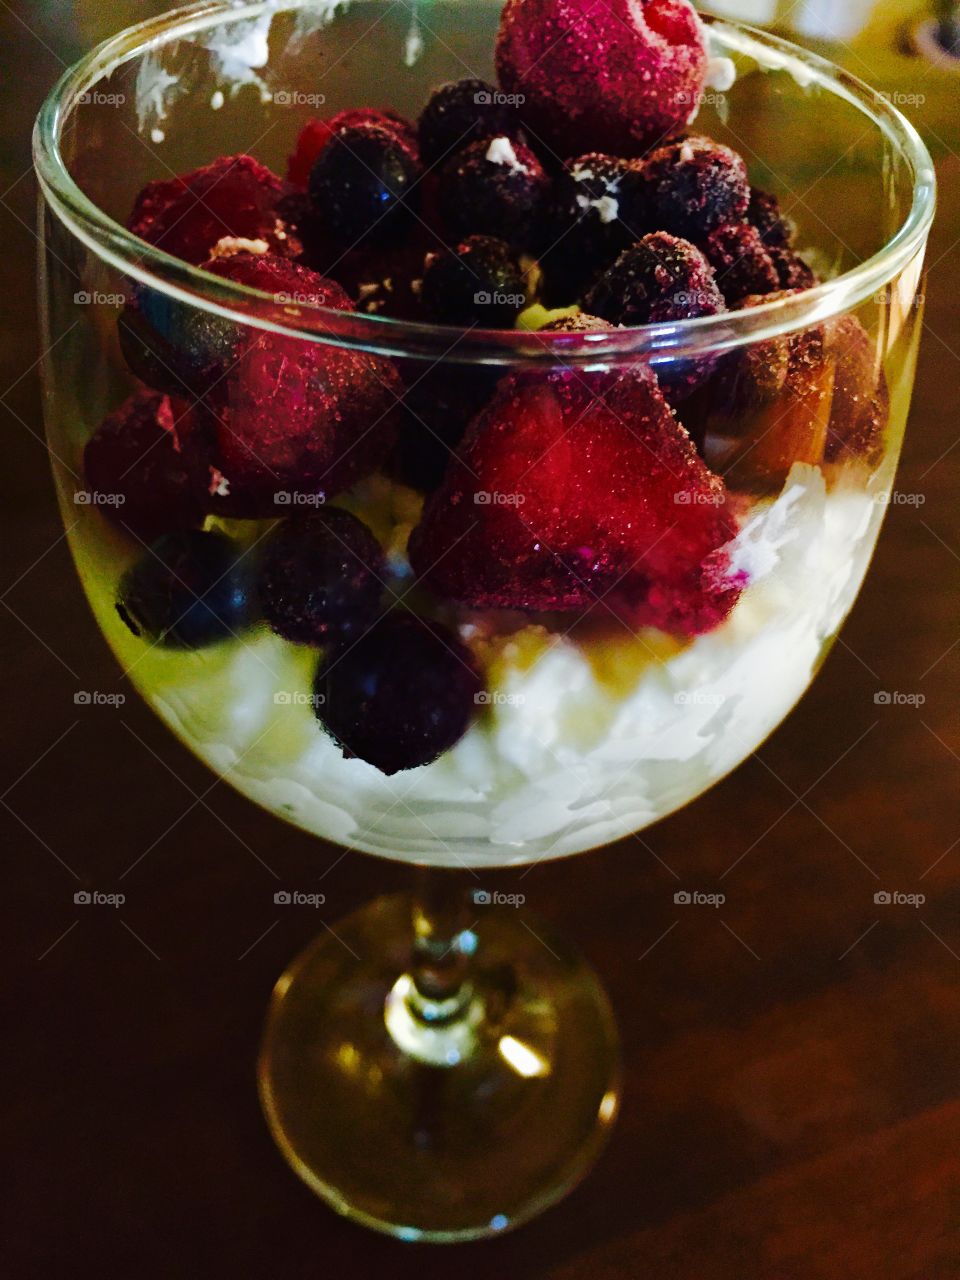 Cottage cheese, blueberries, strawberries, cherries in a dessert glass, looking colorful.